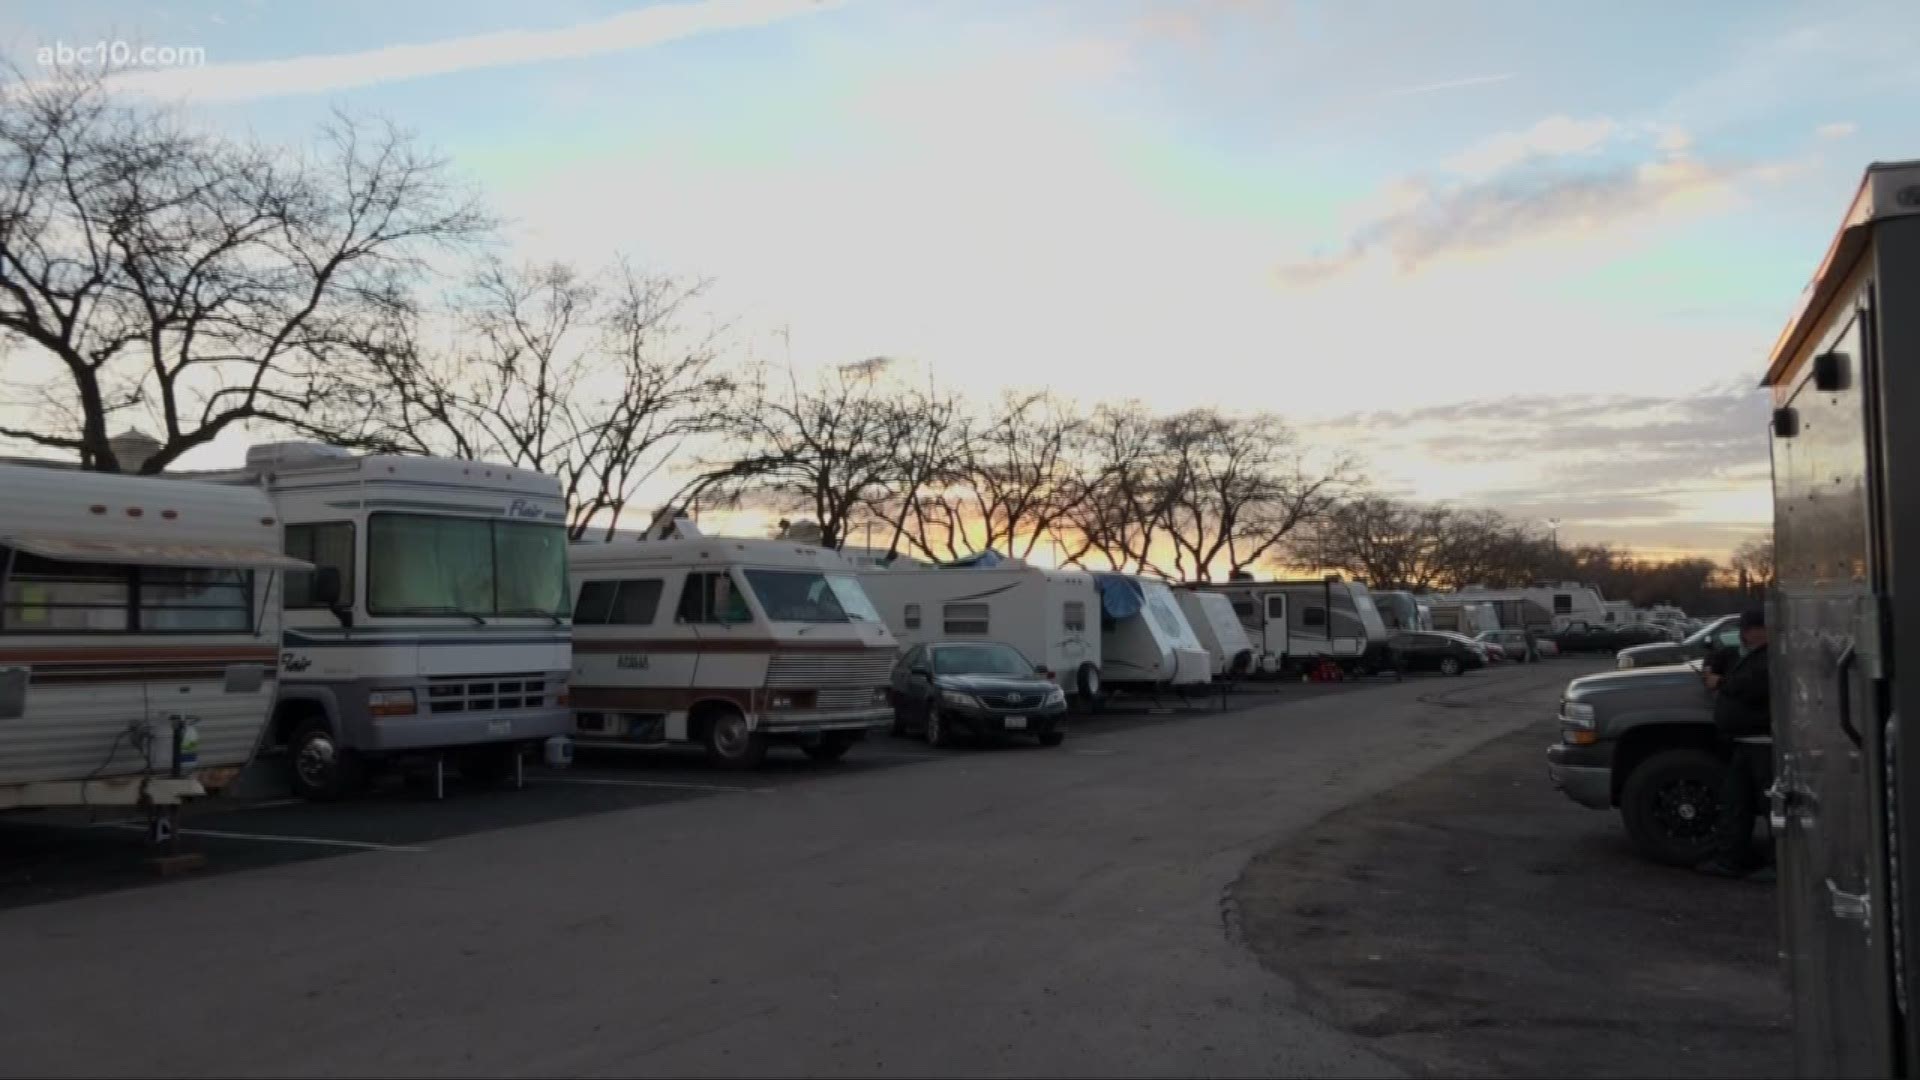 There's a lot of uncertainty right now for hundreds of camp fire survivors. As claims make their way through insurance agencies, people are looking for places to live. The Silver Dollar Fairgrounds in Chico will close at the end of the month when the Red Cross' lease with the county expires.